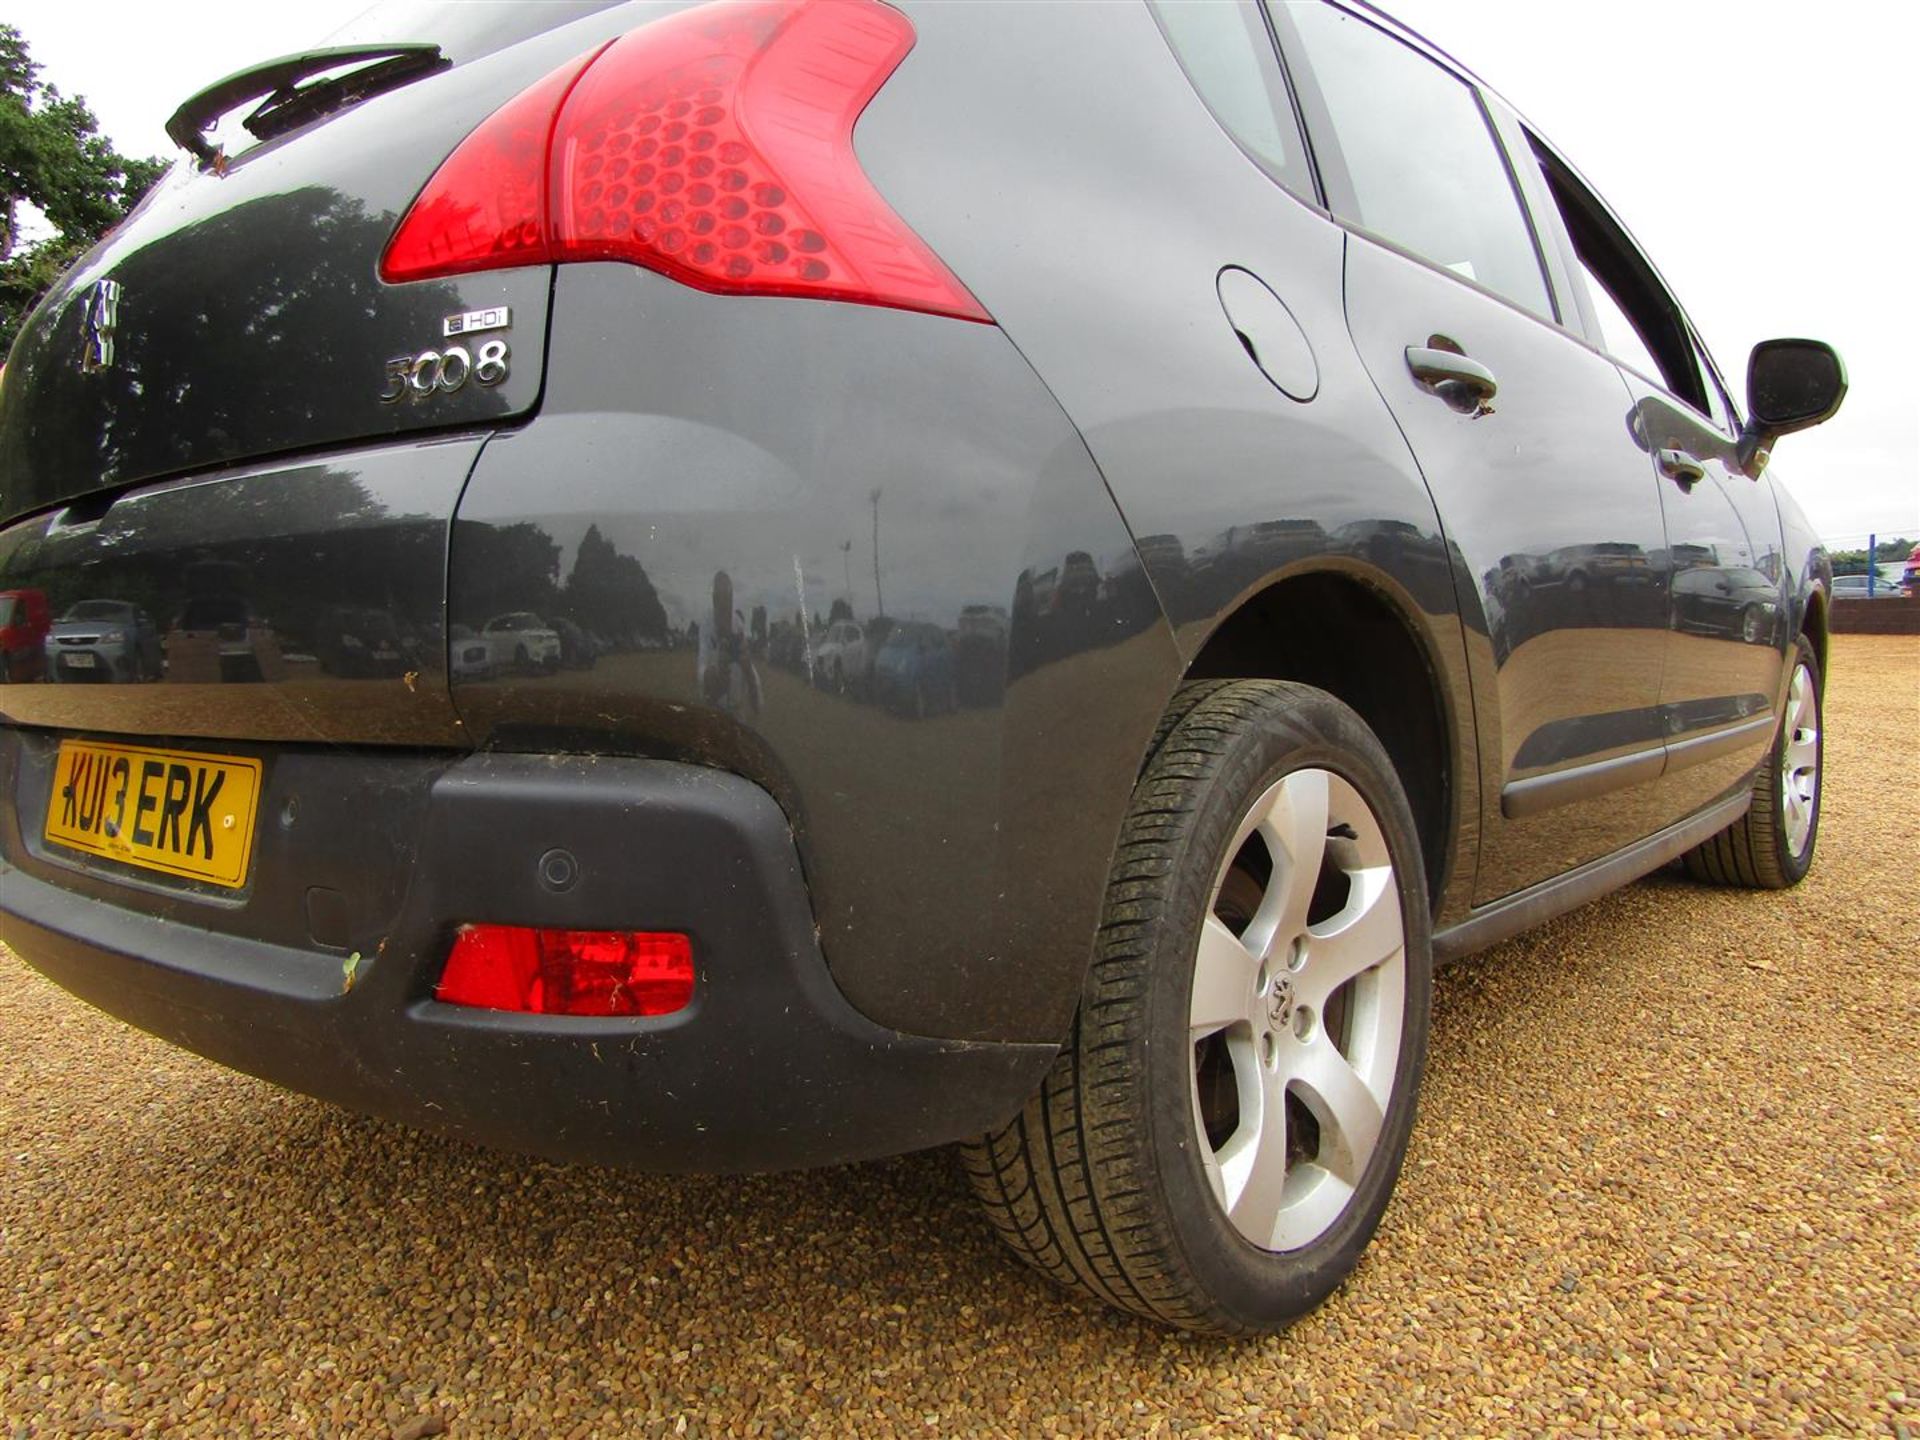 13 13 Peugeot 3008 Active E-HDI - Image 16 of 20